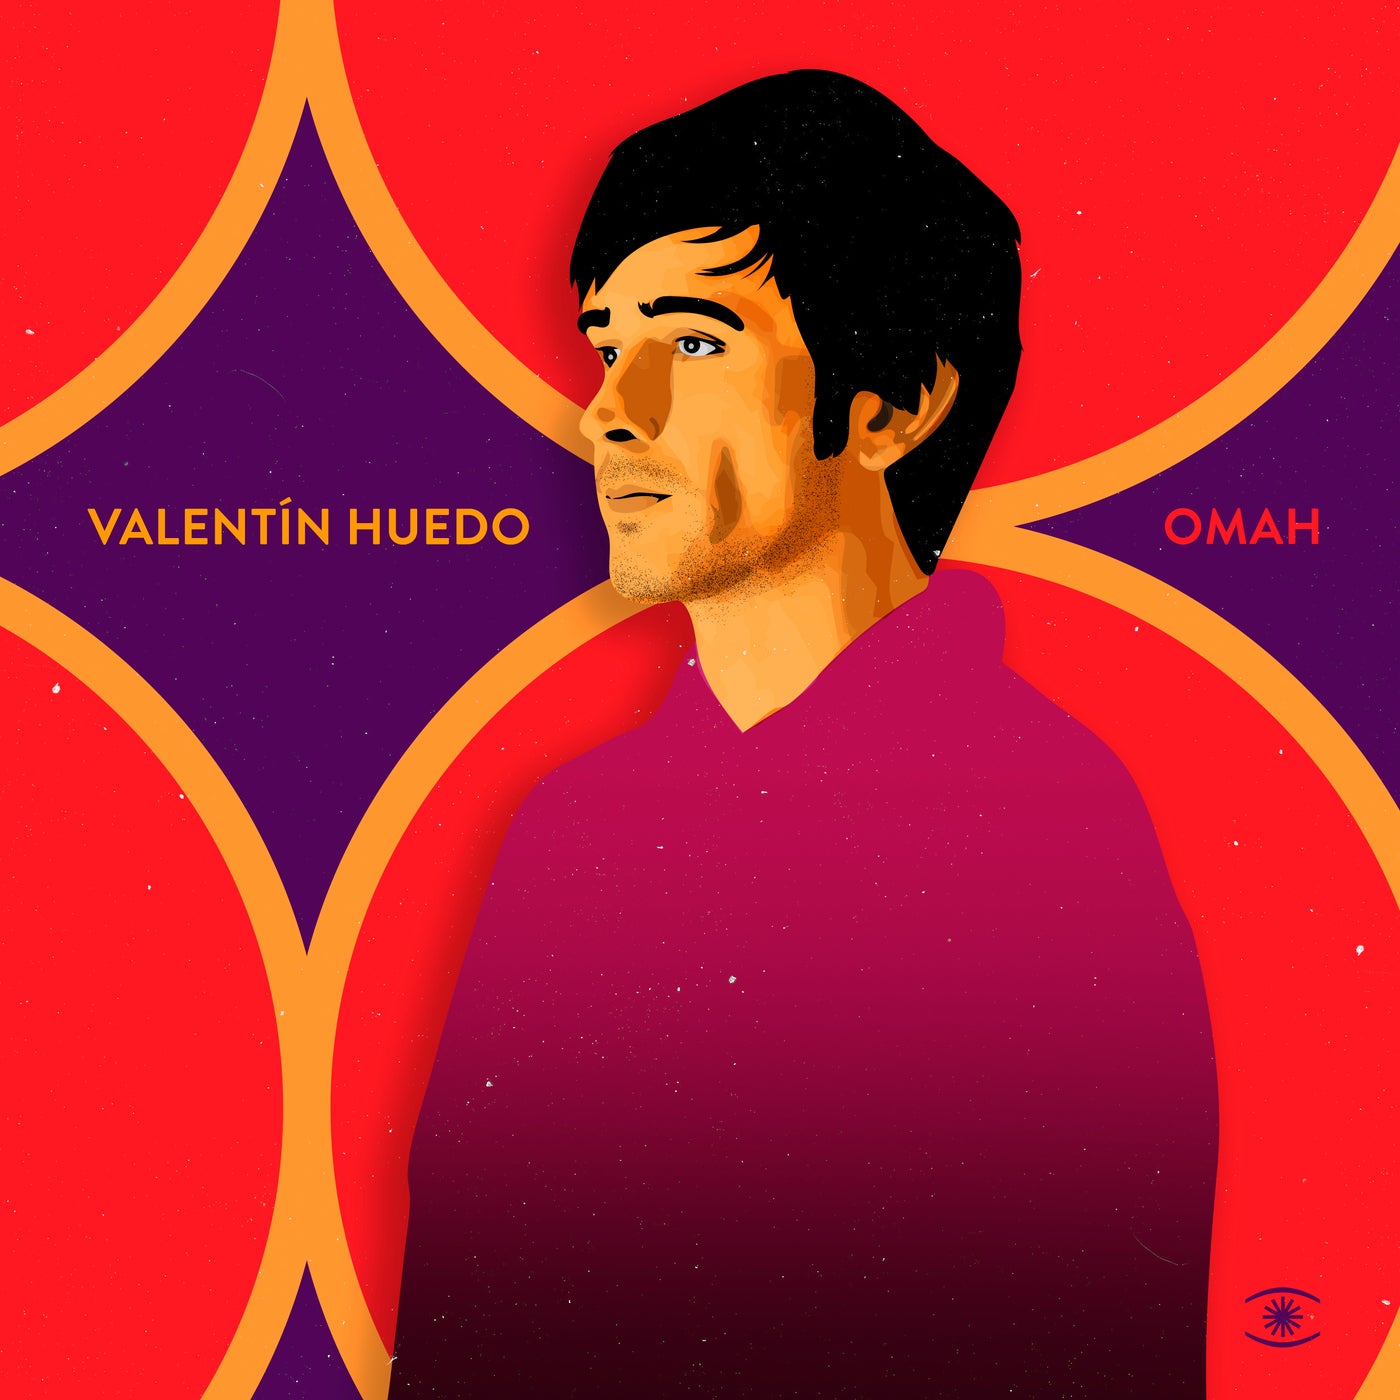 image cover: OliO, Valentín Huedo, WALTHER - Omah on Music For Dreams